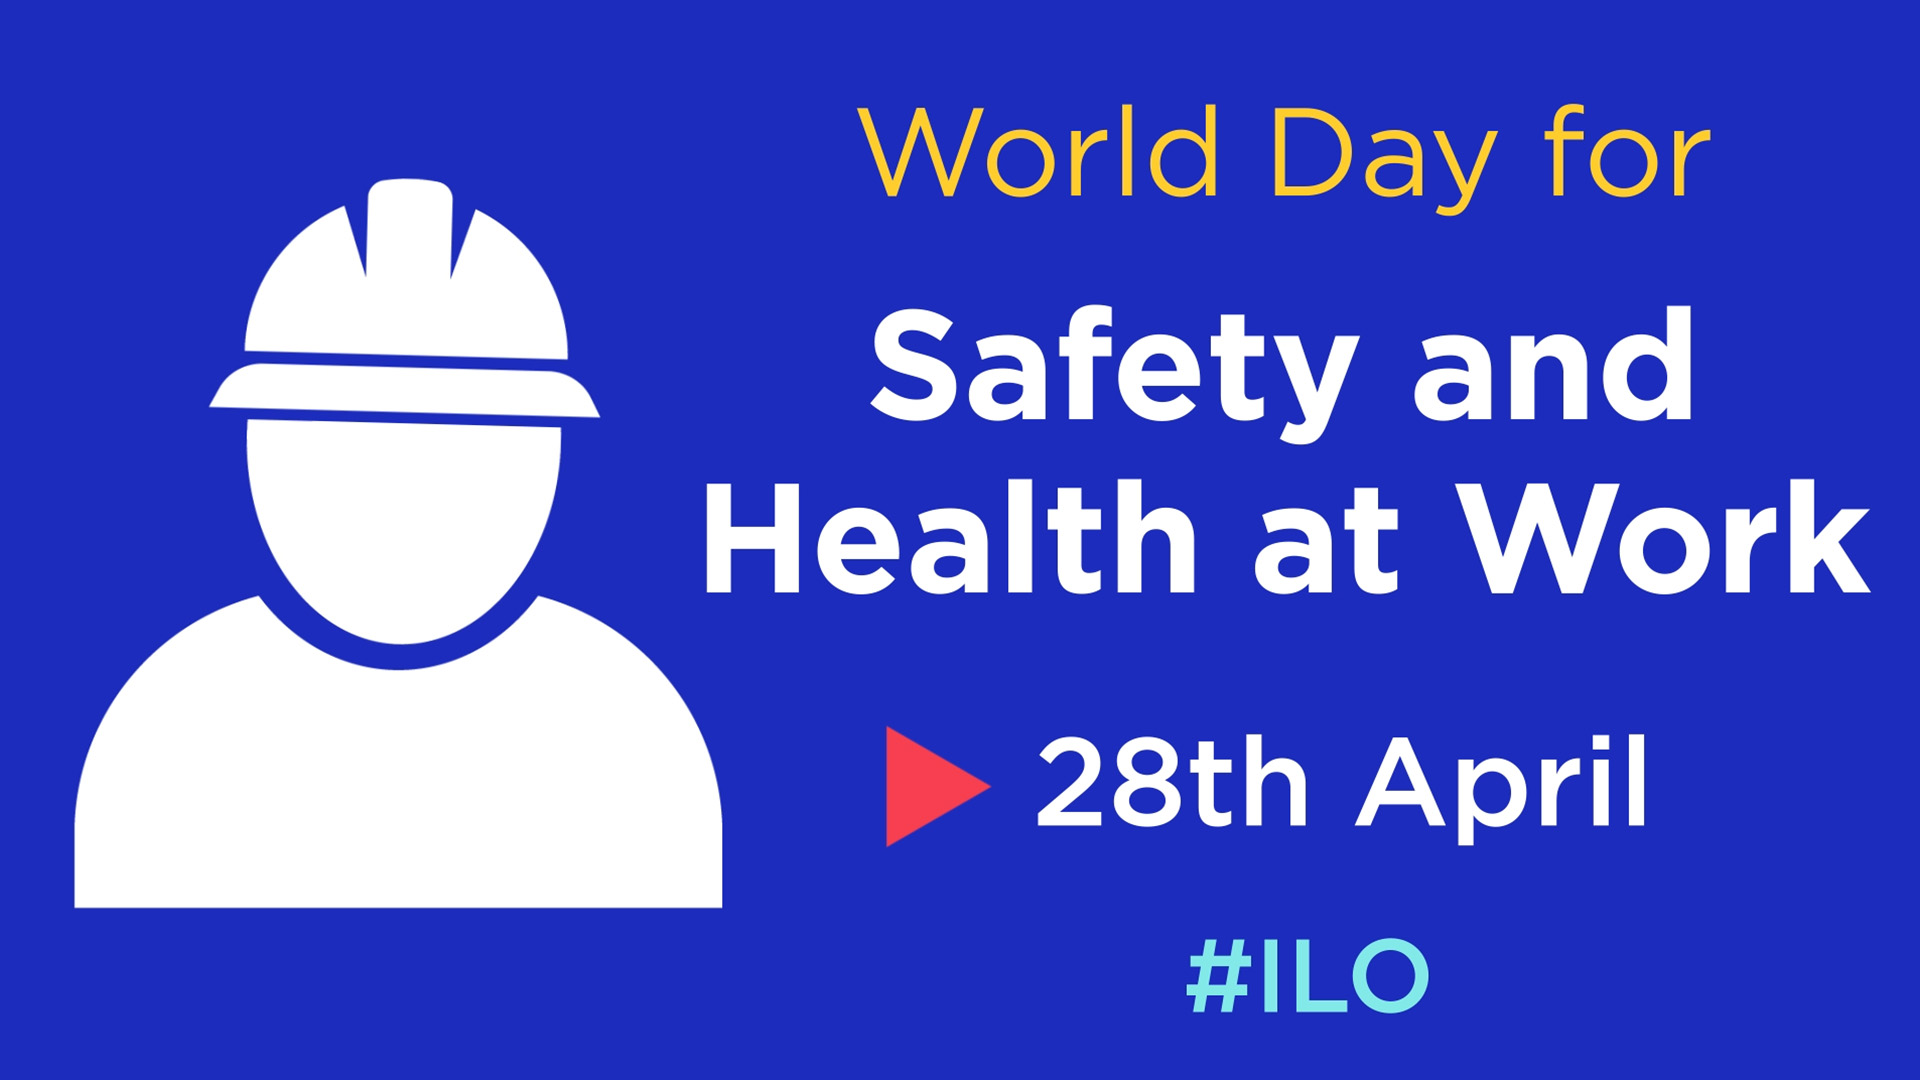 world day for safety and health at work 28th april #ILO